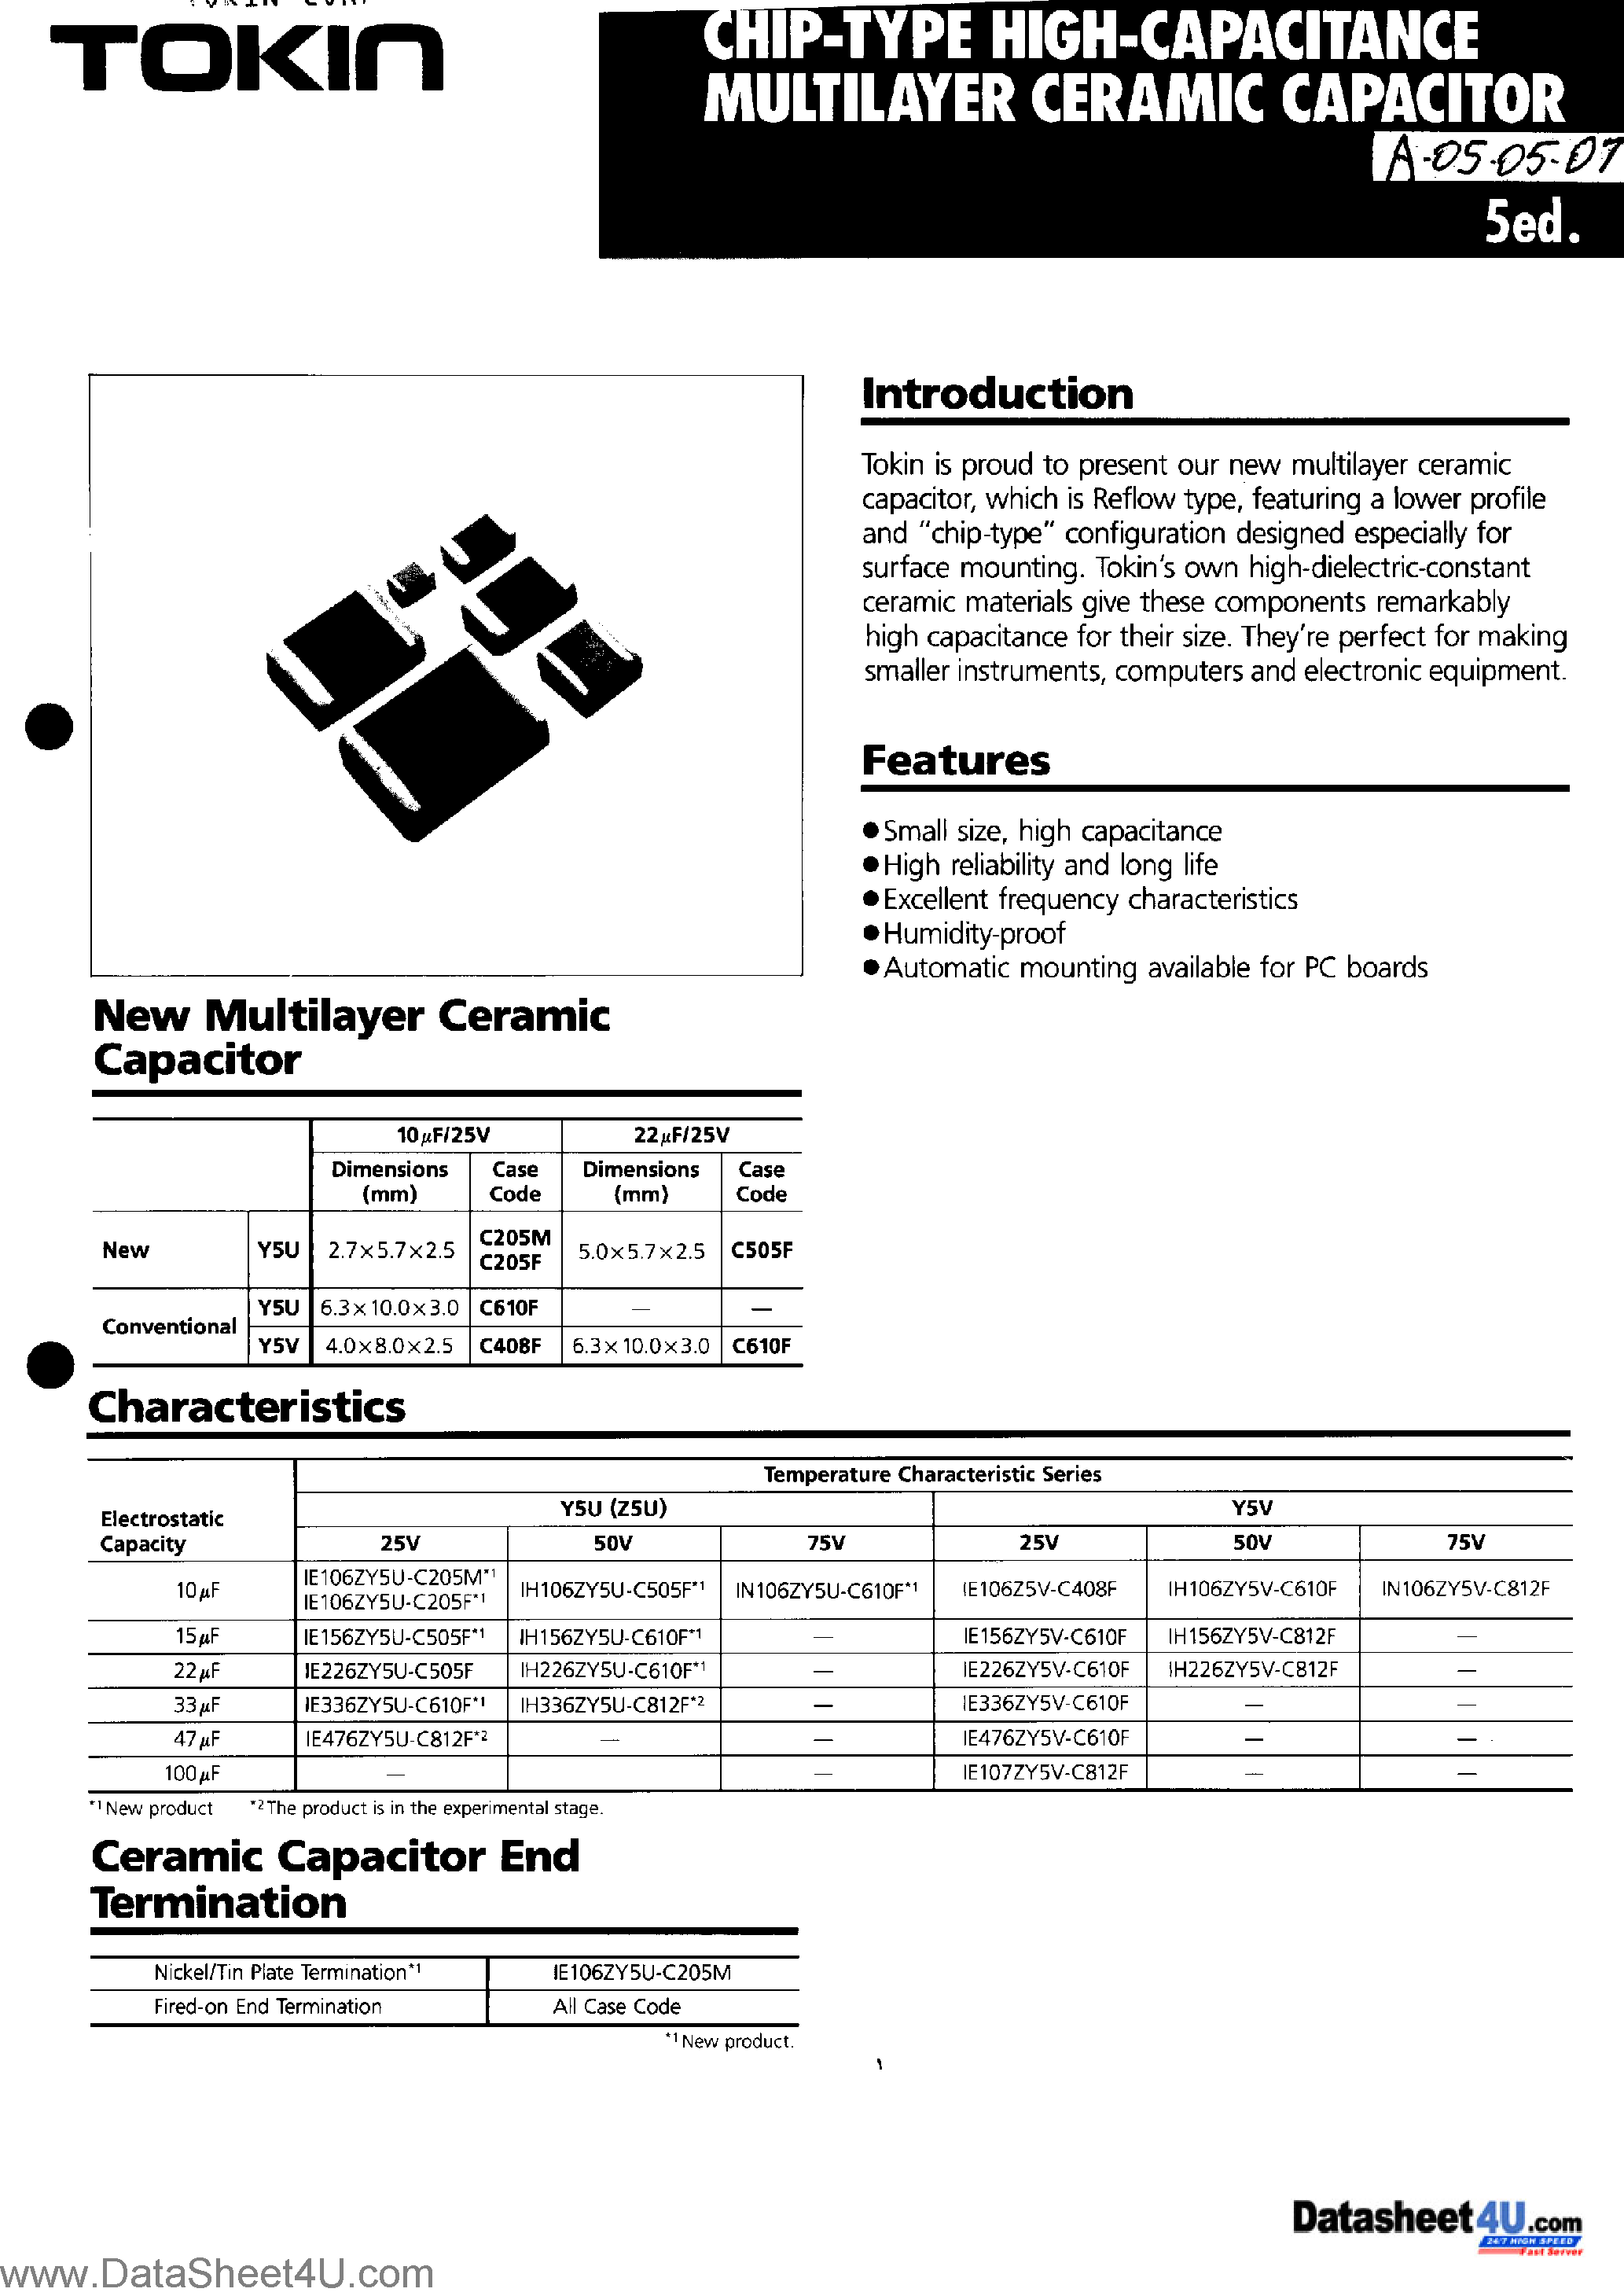 Datasheet 1N106ZY5U-Cxxx - Chip Type High Capacitance Multilayer Ceramic Capacitor page 1